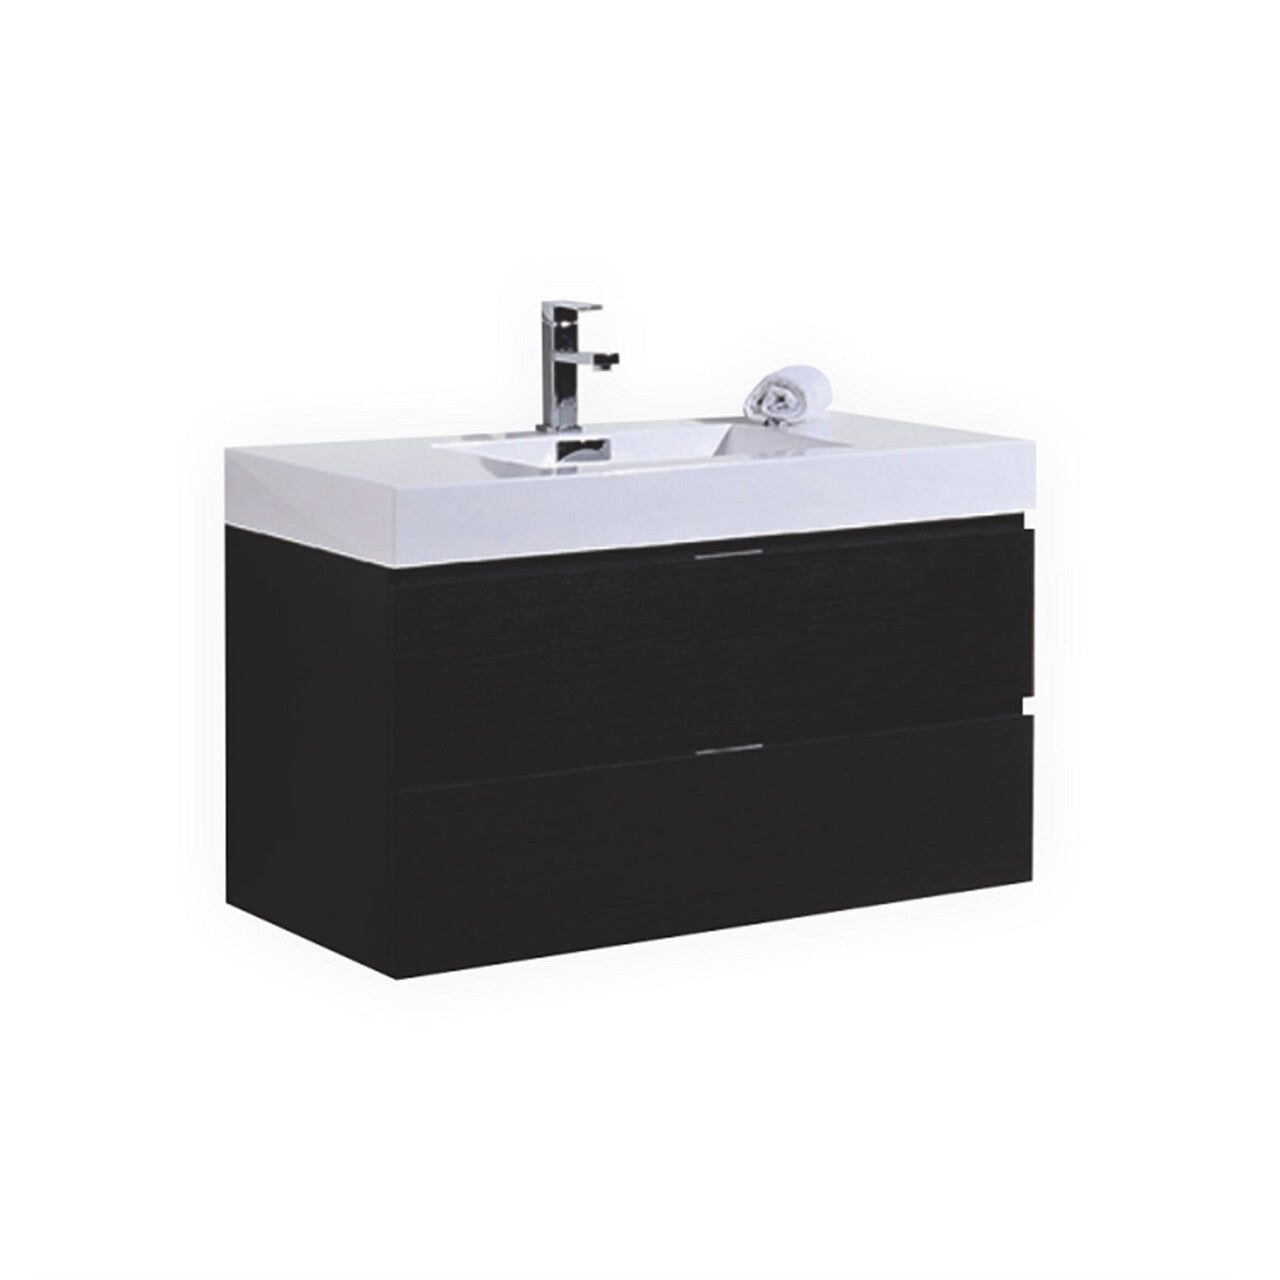 KUBEBATH Bliss BSL40-BK 40" Single Wall Mount Bathroom Vanity in Black with White Acrylic Composite, Integrated Sink, Angled View